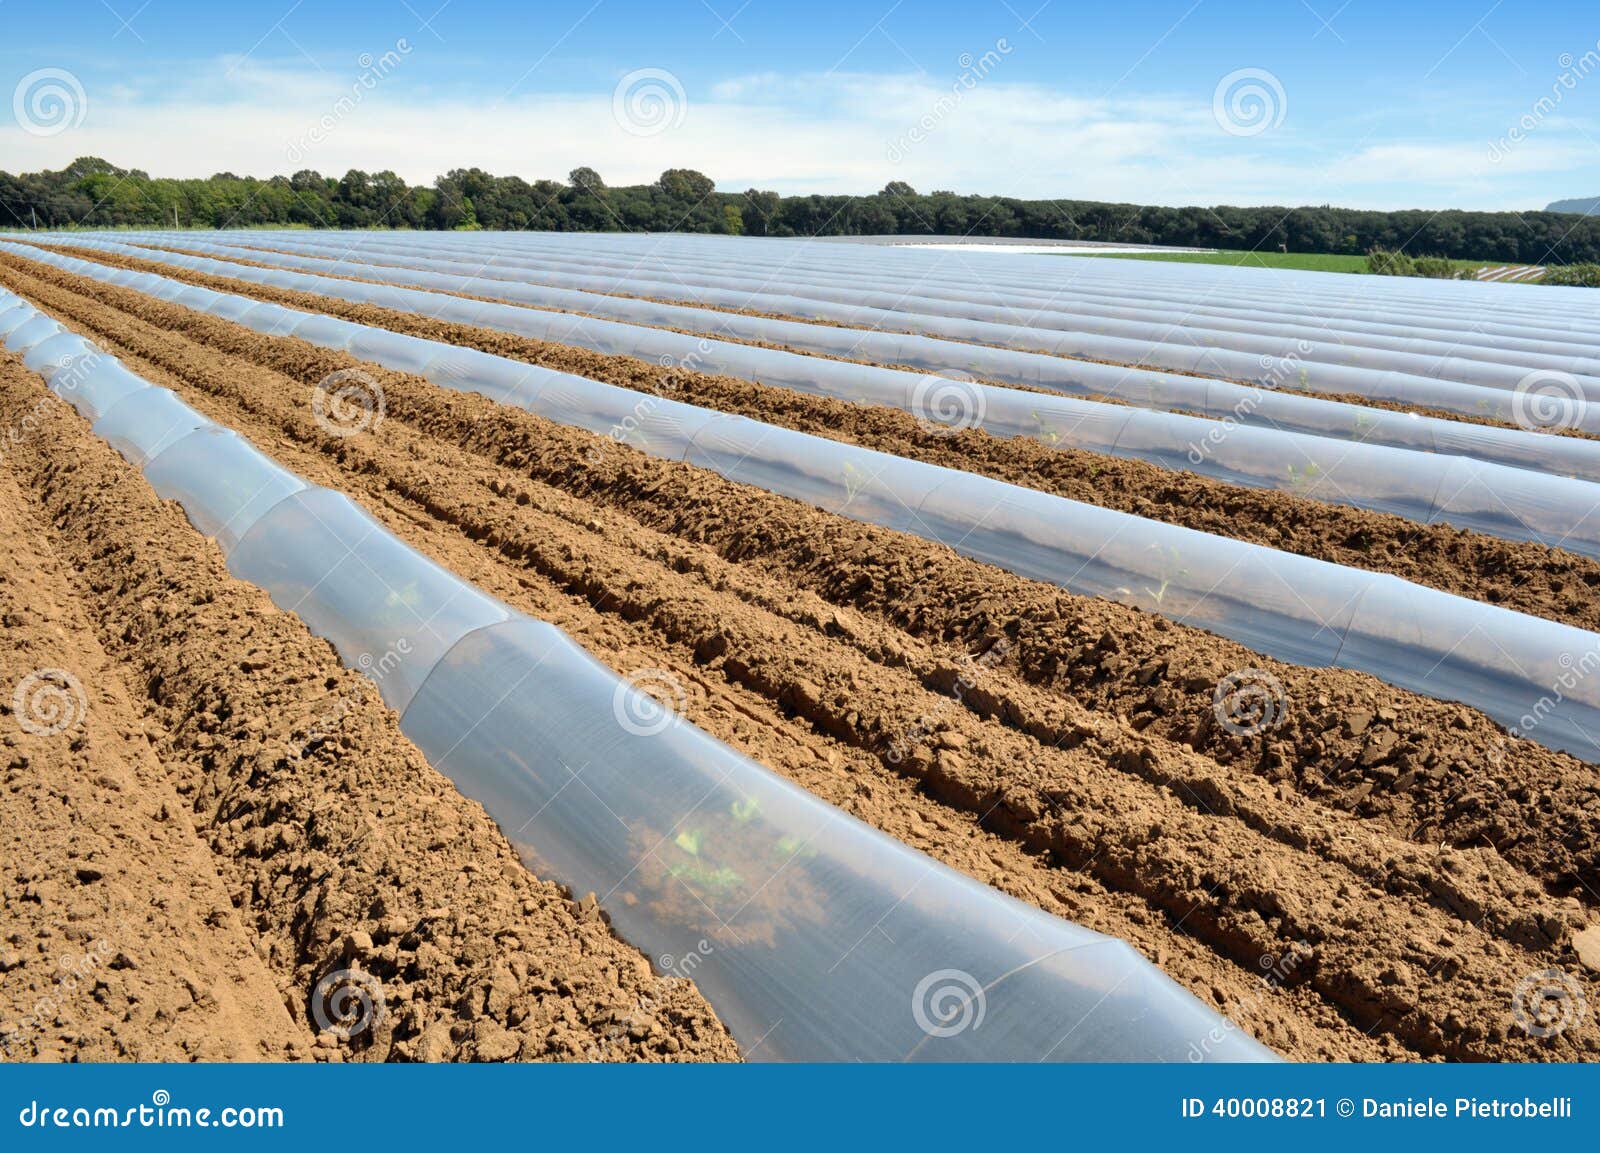 field-vegetable-crops-rows-covered-polythene-cloches-protection-plants-under-plastic-strips-plastic-covering-40008821.jpg